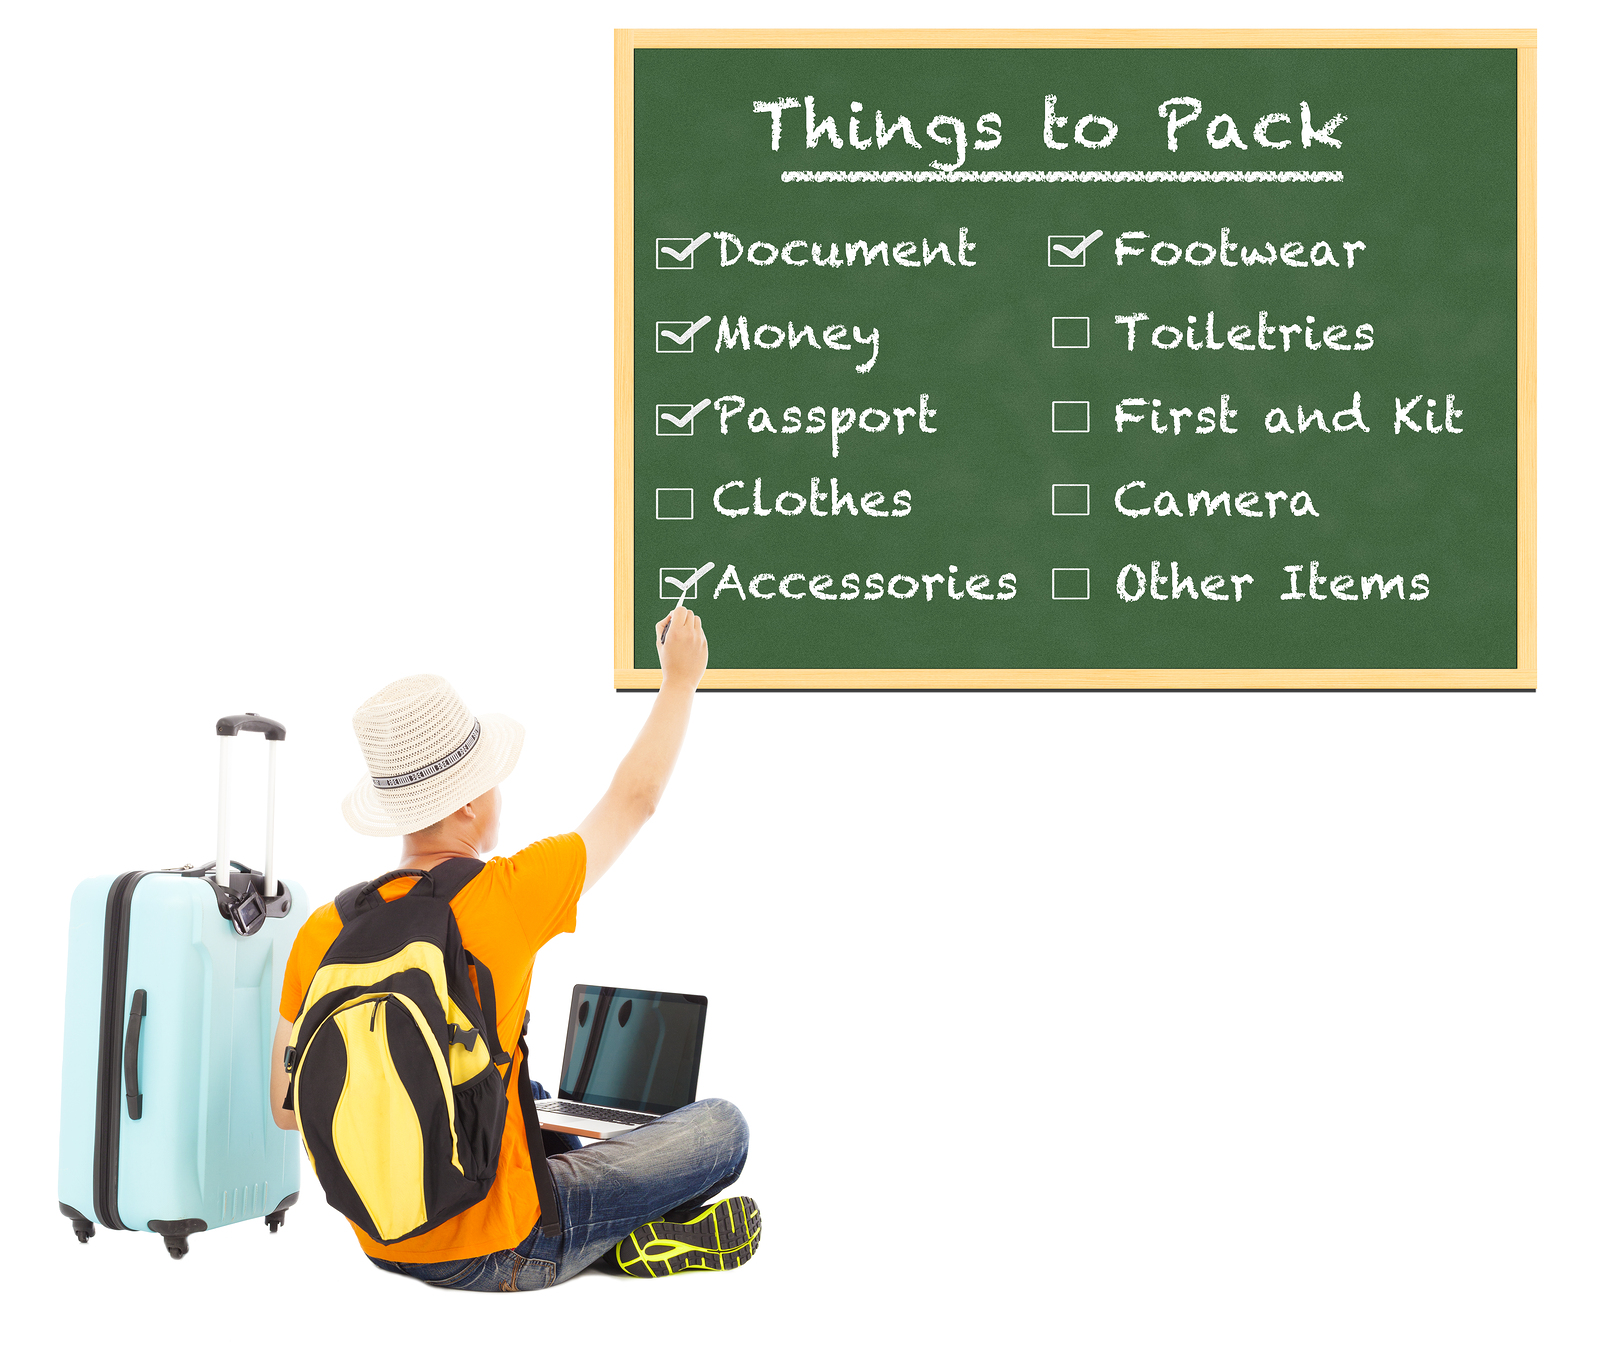 young backpacker check things to pack on blackboard